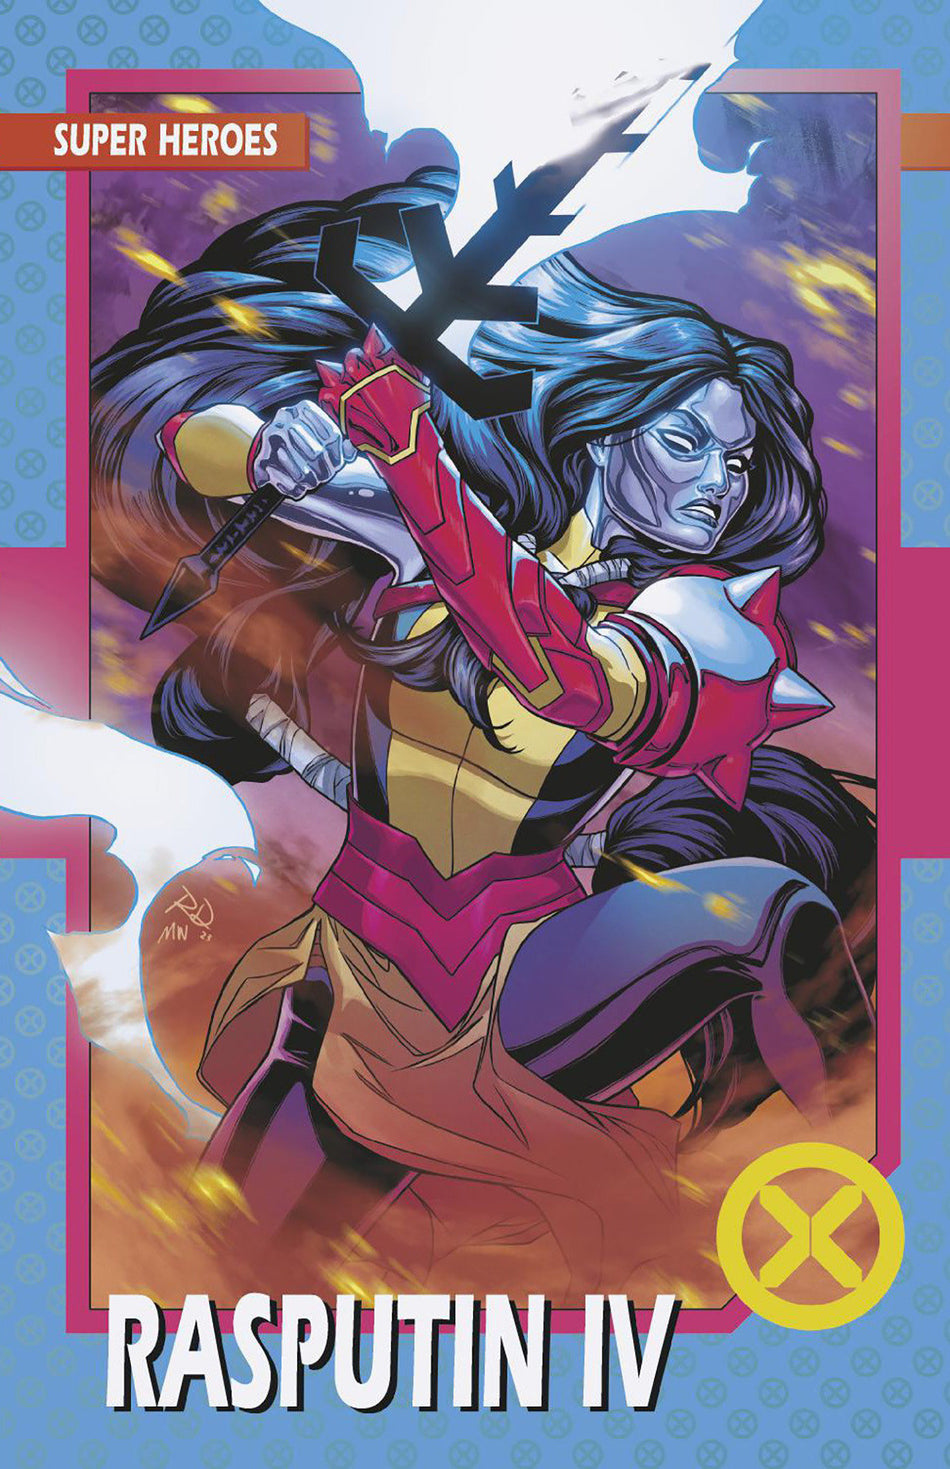 Stock Photo of X-Men 27 Russell Dauterman Trading Card Variant [Fall] Comics sold by Stronghold Collectibles